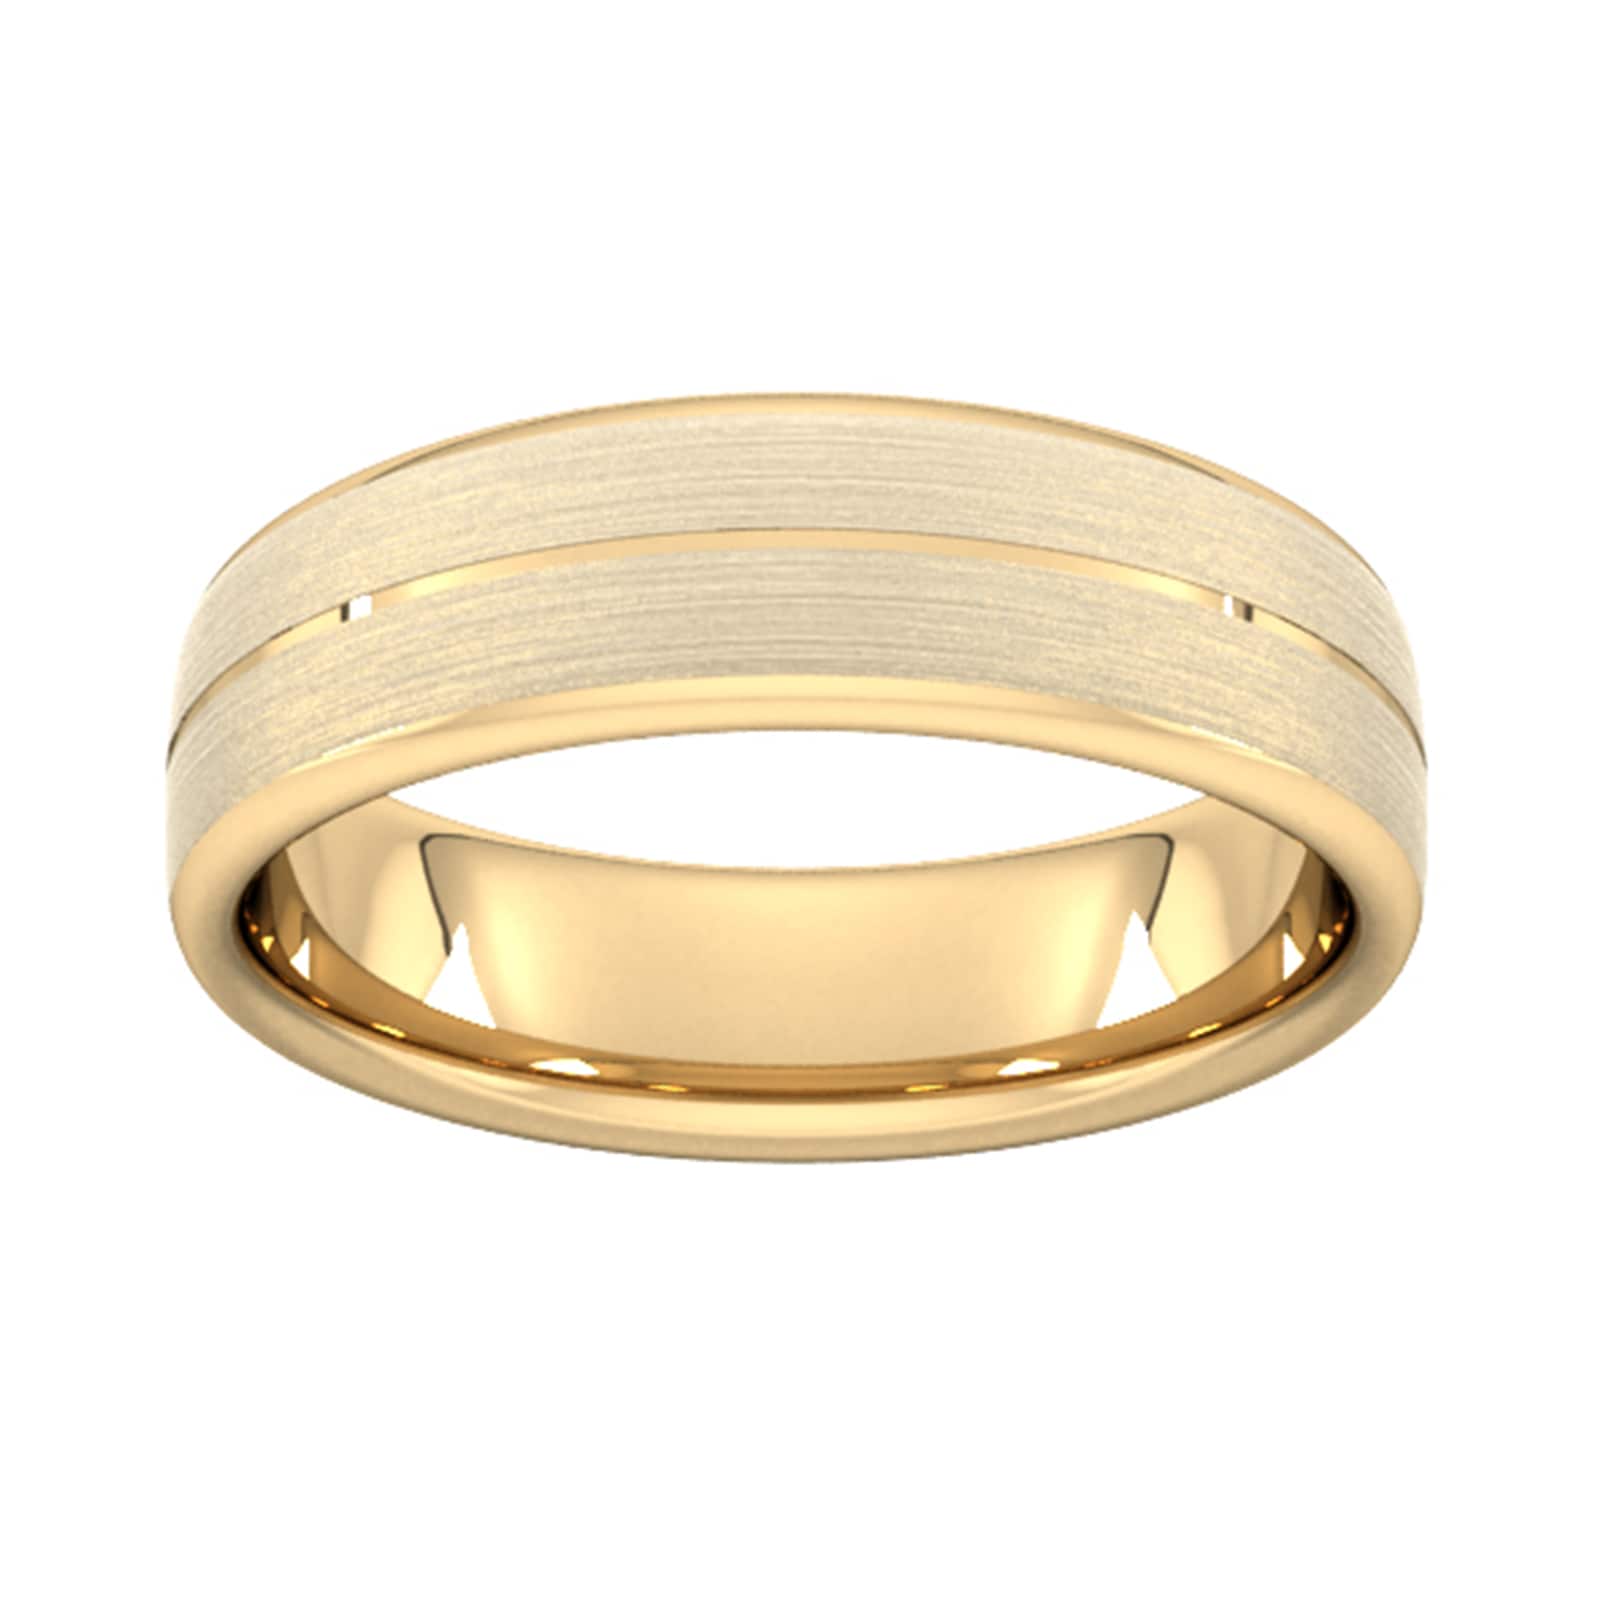 6mm Slight Court Heavy Centre Groove With Chamfered Edge Wedding Ring In 9 Carat Yellow Gold - Ring Size J